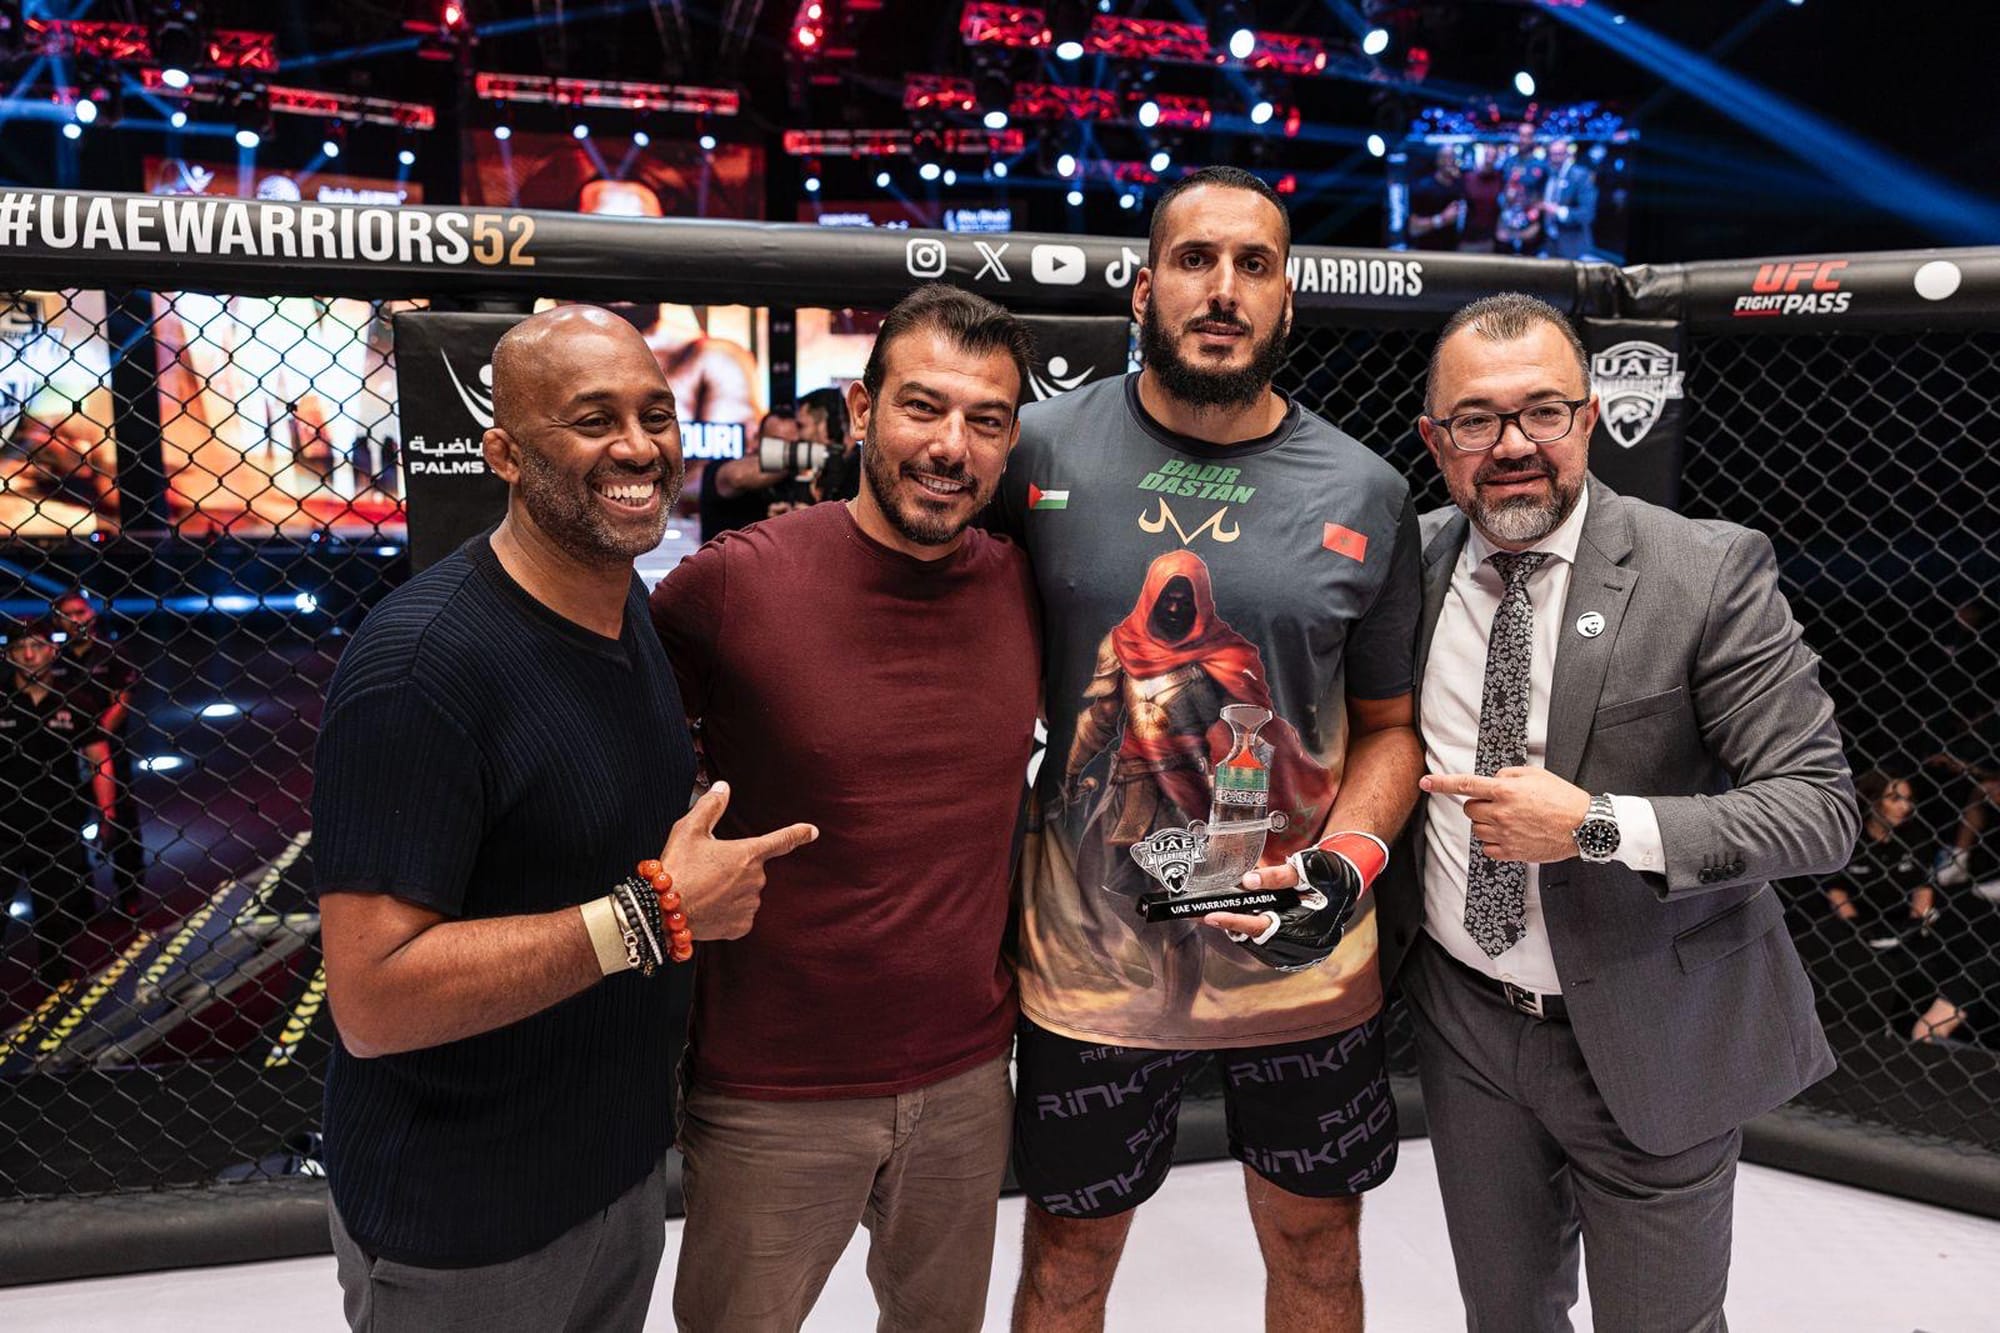 IMMAF Alumni Shine at UAE Warriors 52: A Showcase of Talent and Potential